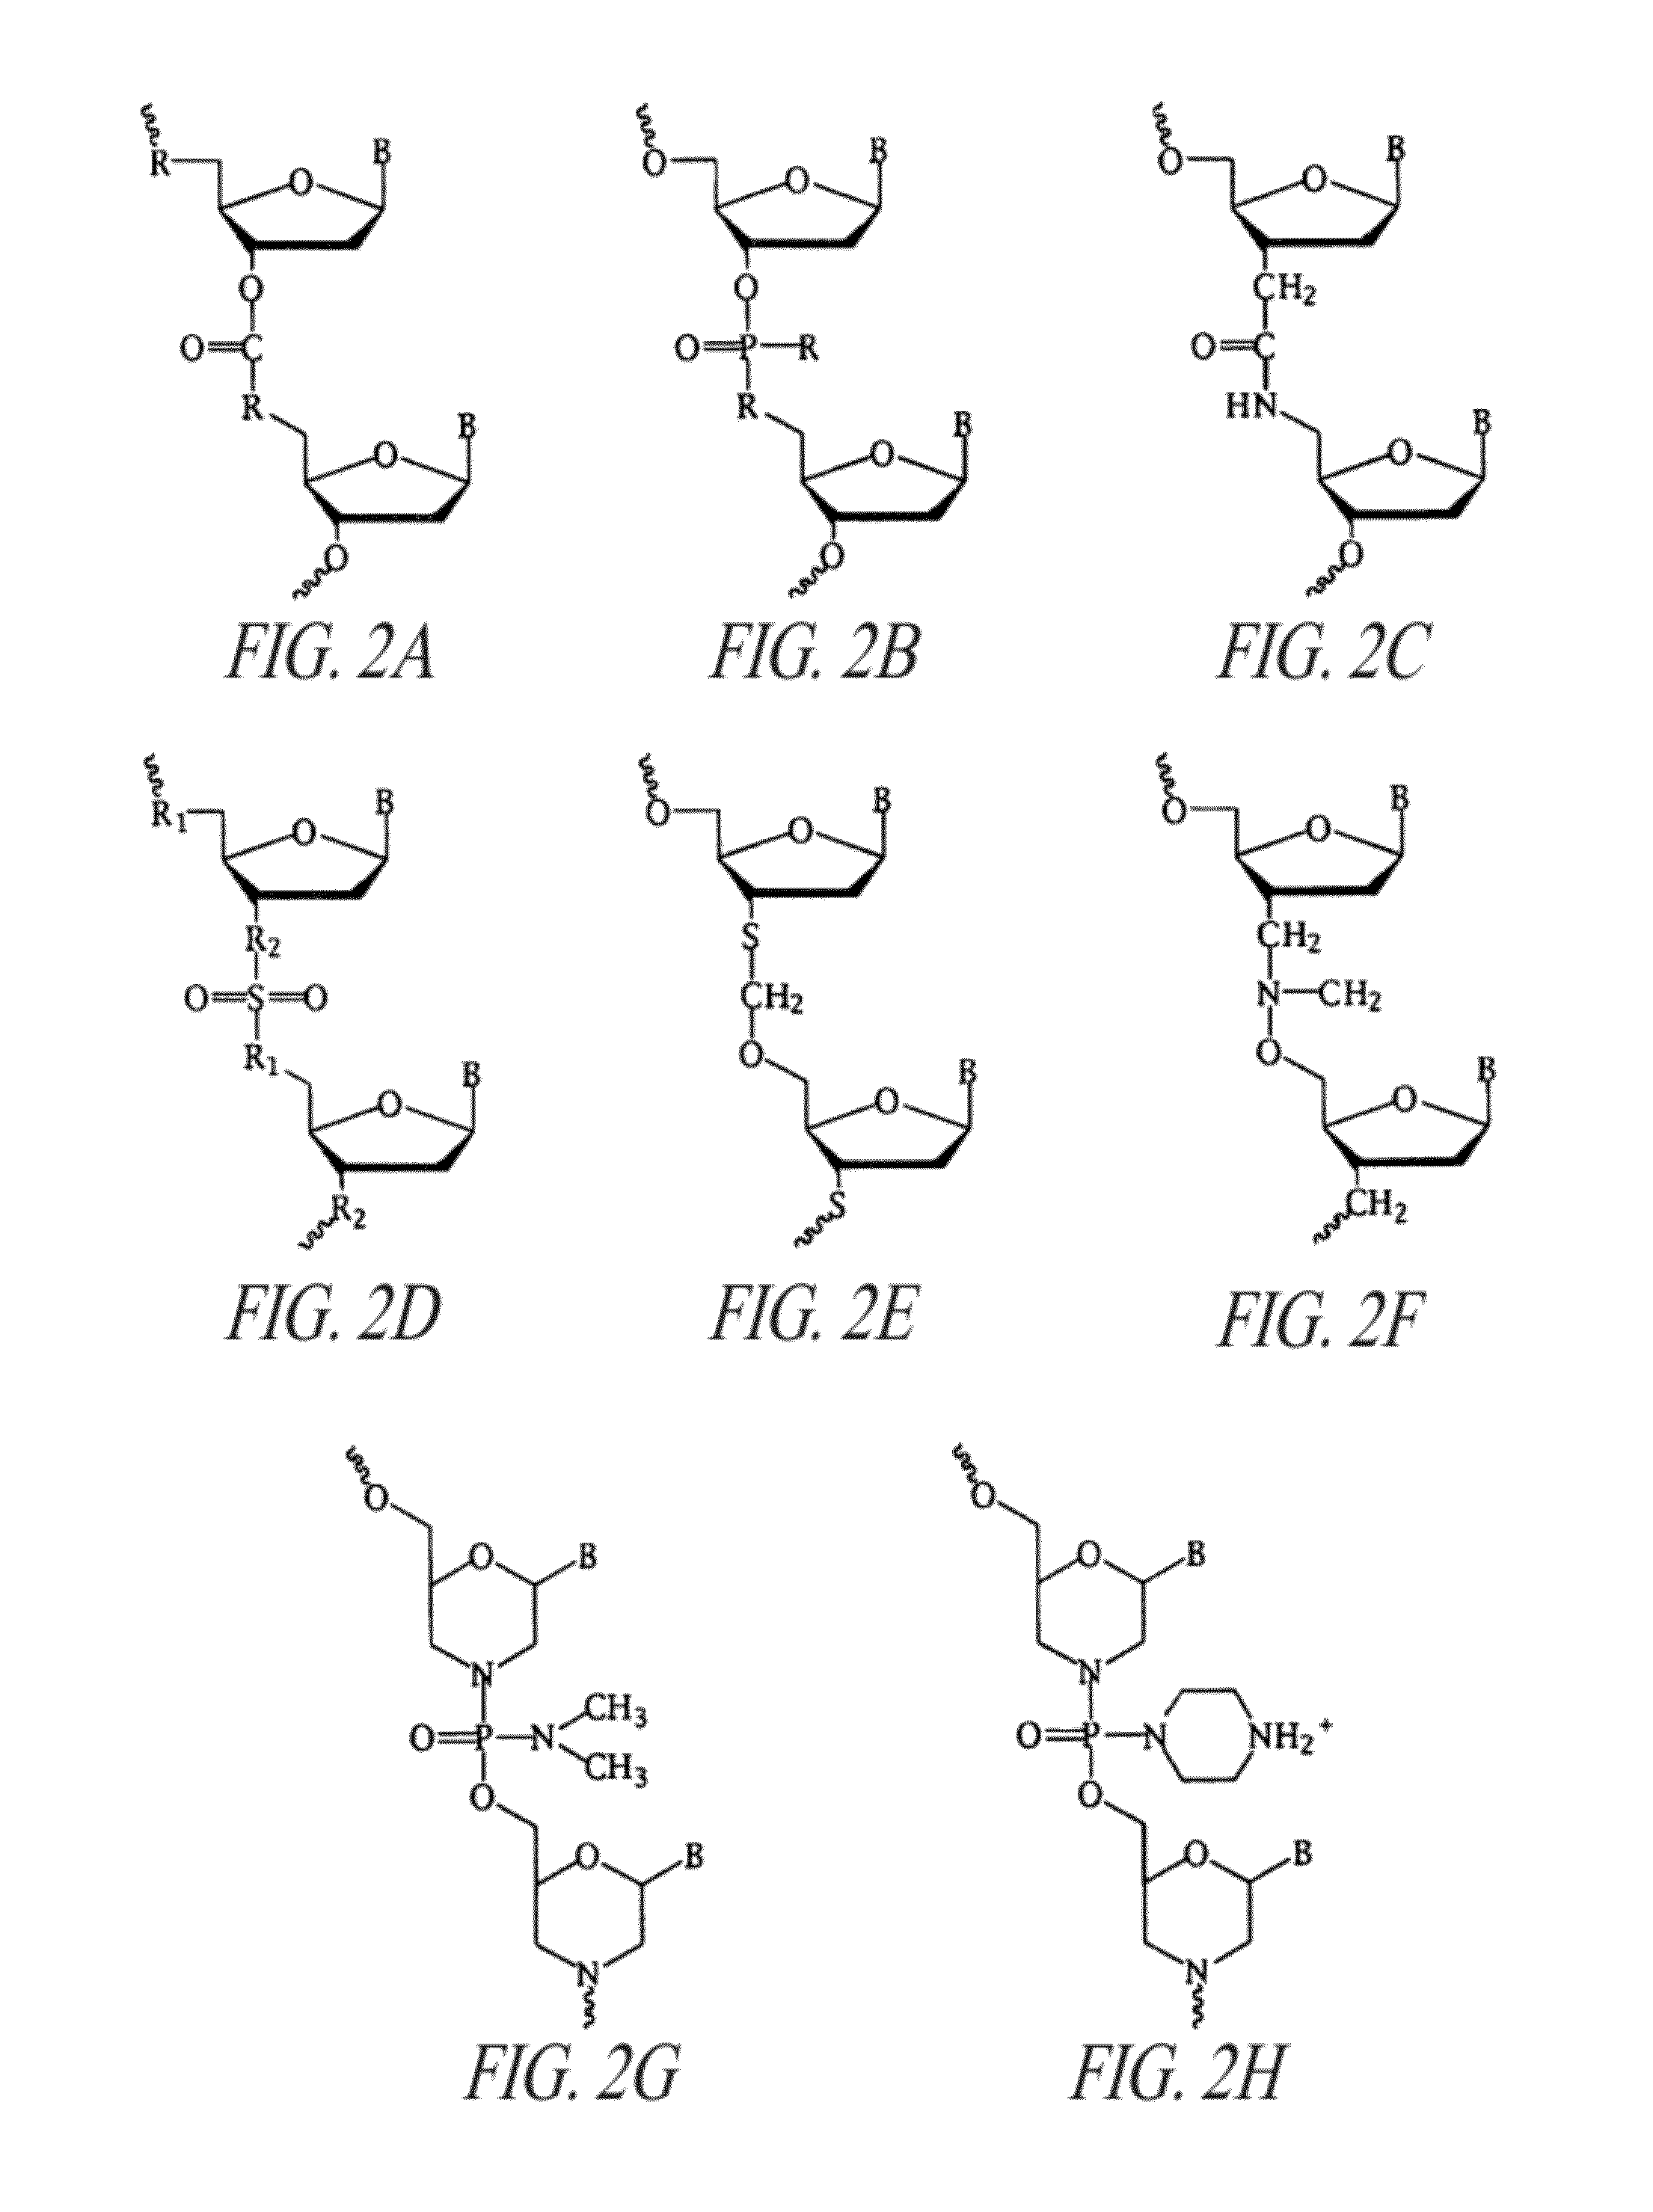 Antisense antiviral compounds and methods for treating a filovirus infection